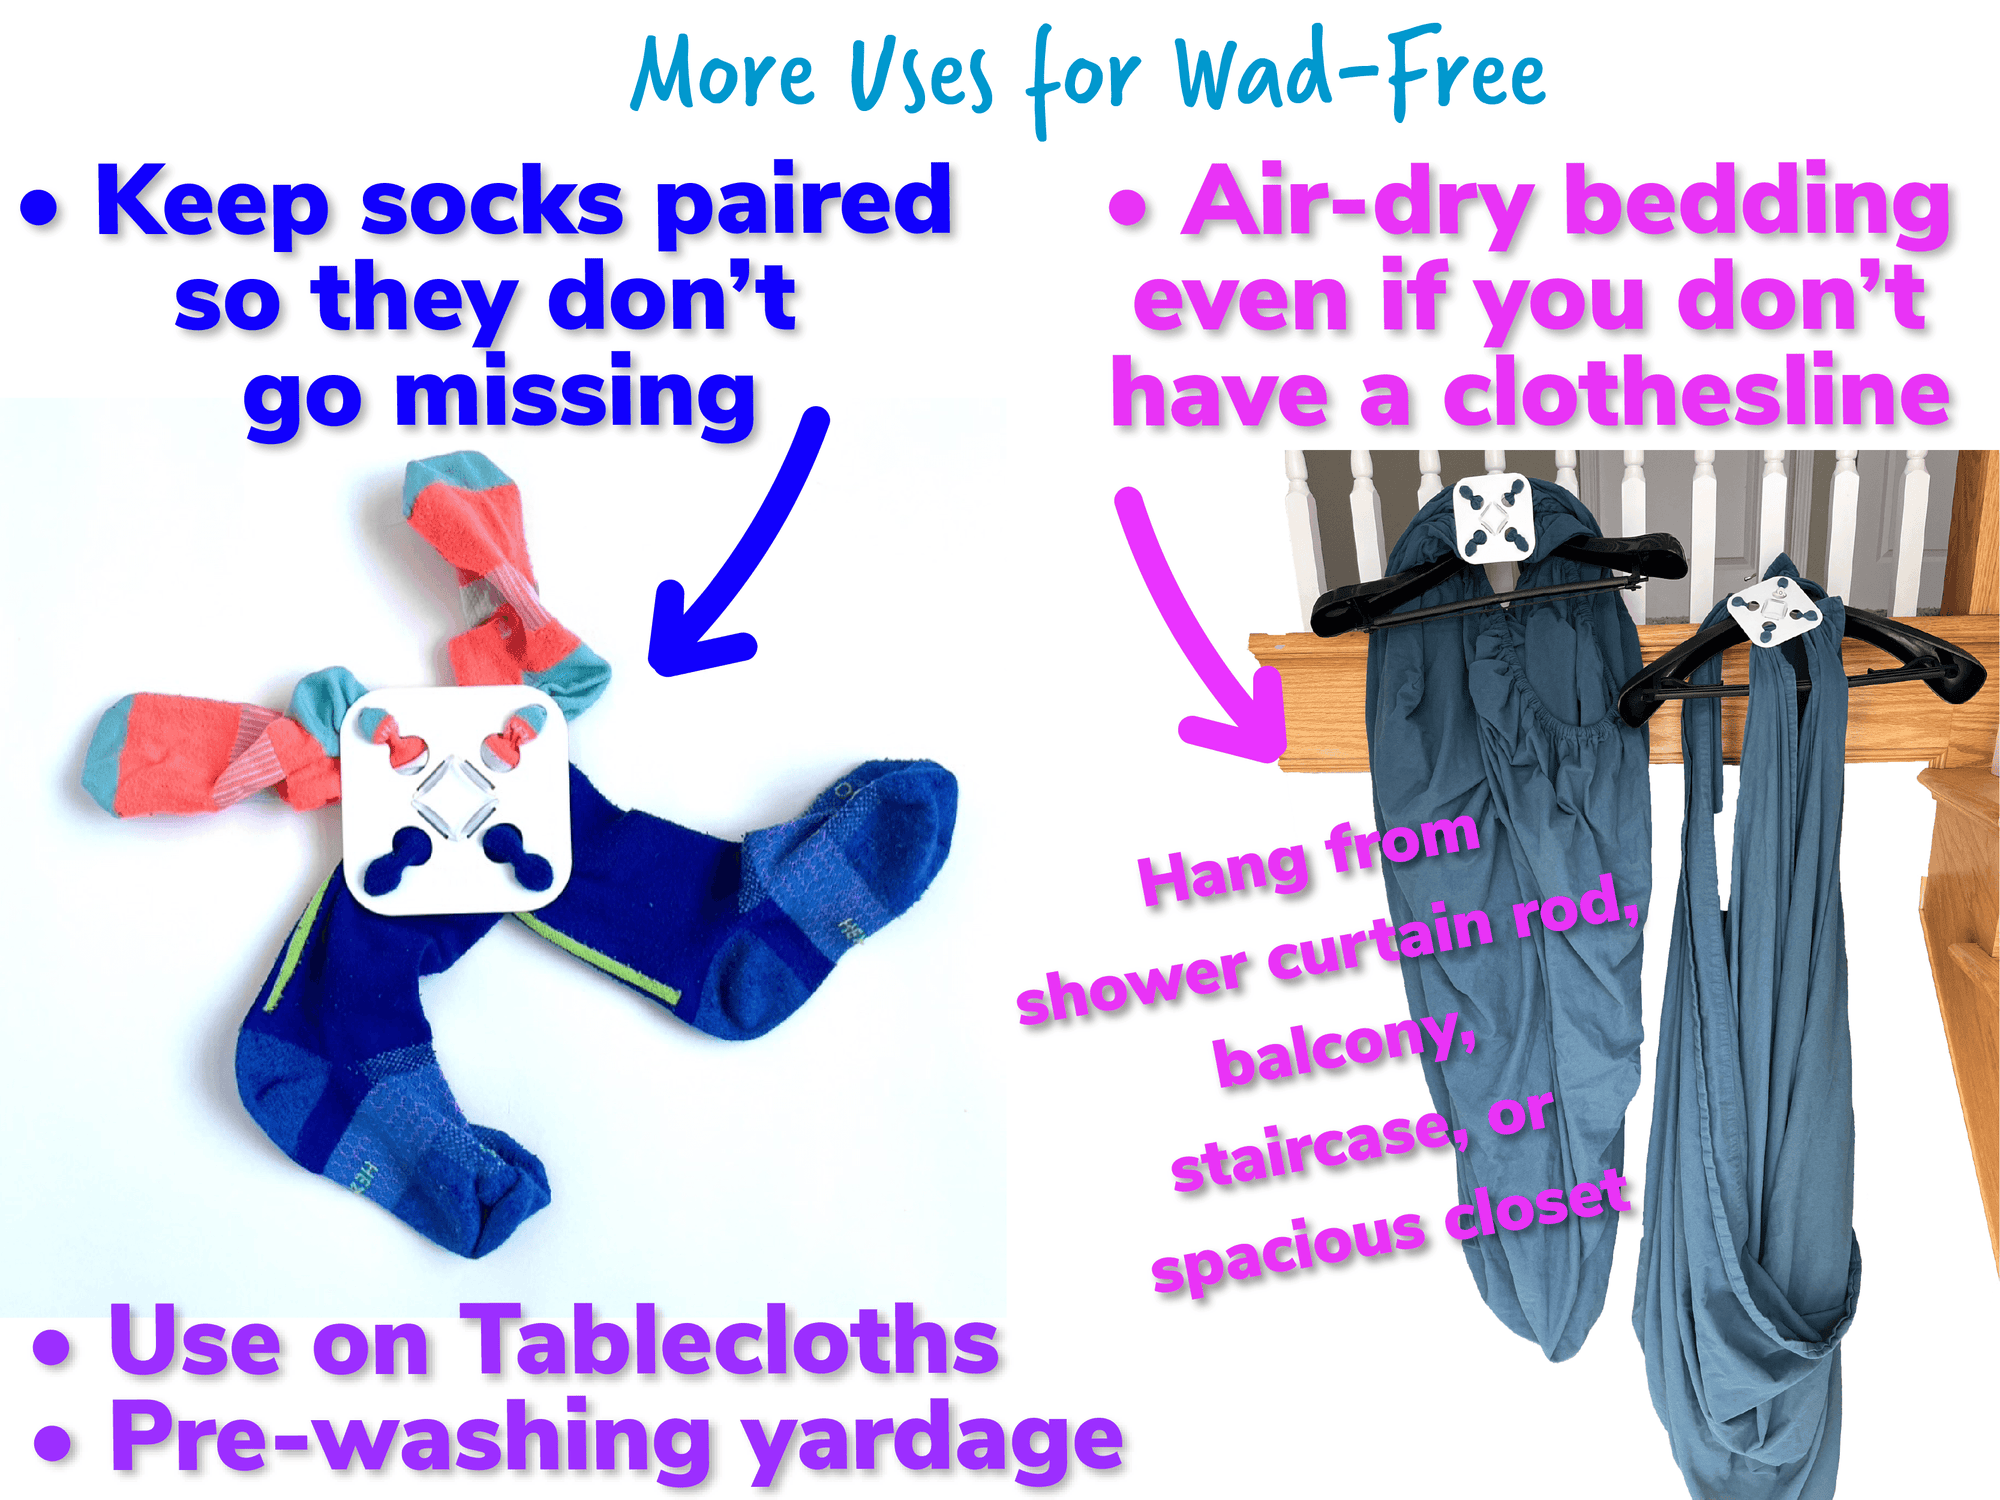 More uses for Wad-Free for Bed Sheets include keeping socks paired so they do not go missing, using on tablecloths, pre-washing fabric yardage, and air-dry bedding even if you don&#39;t have a clothesline, just hang from a shower curtain rod, balcony, staircase, or spacious closet. Photo of white square Wad-Free with two orange and two blue socks attached. Photo of two white Wad-Free squares attached to a blue top sheet and a blue fitted sheets hanging from black hangers off the staircase bannister 